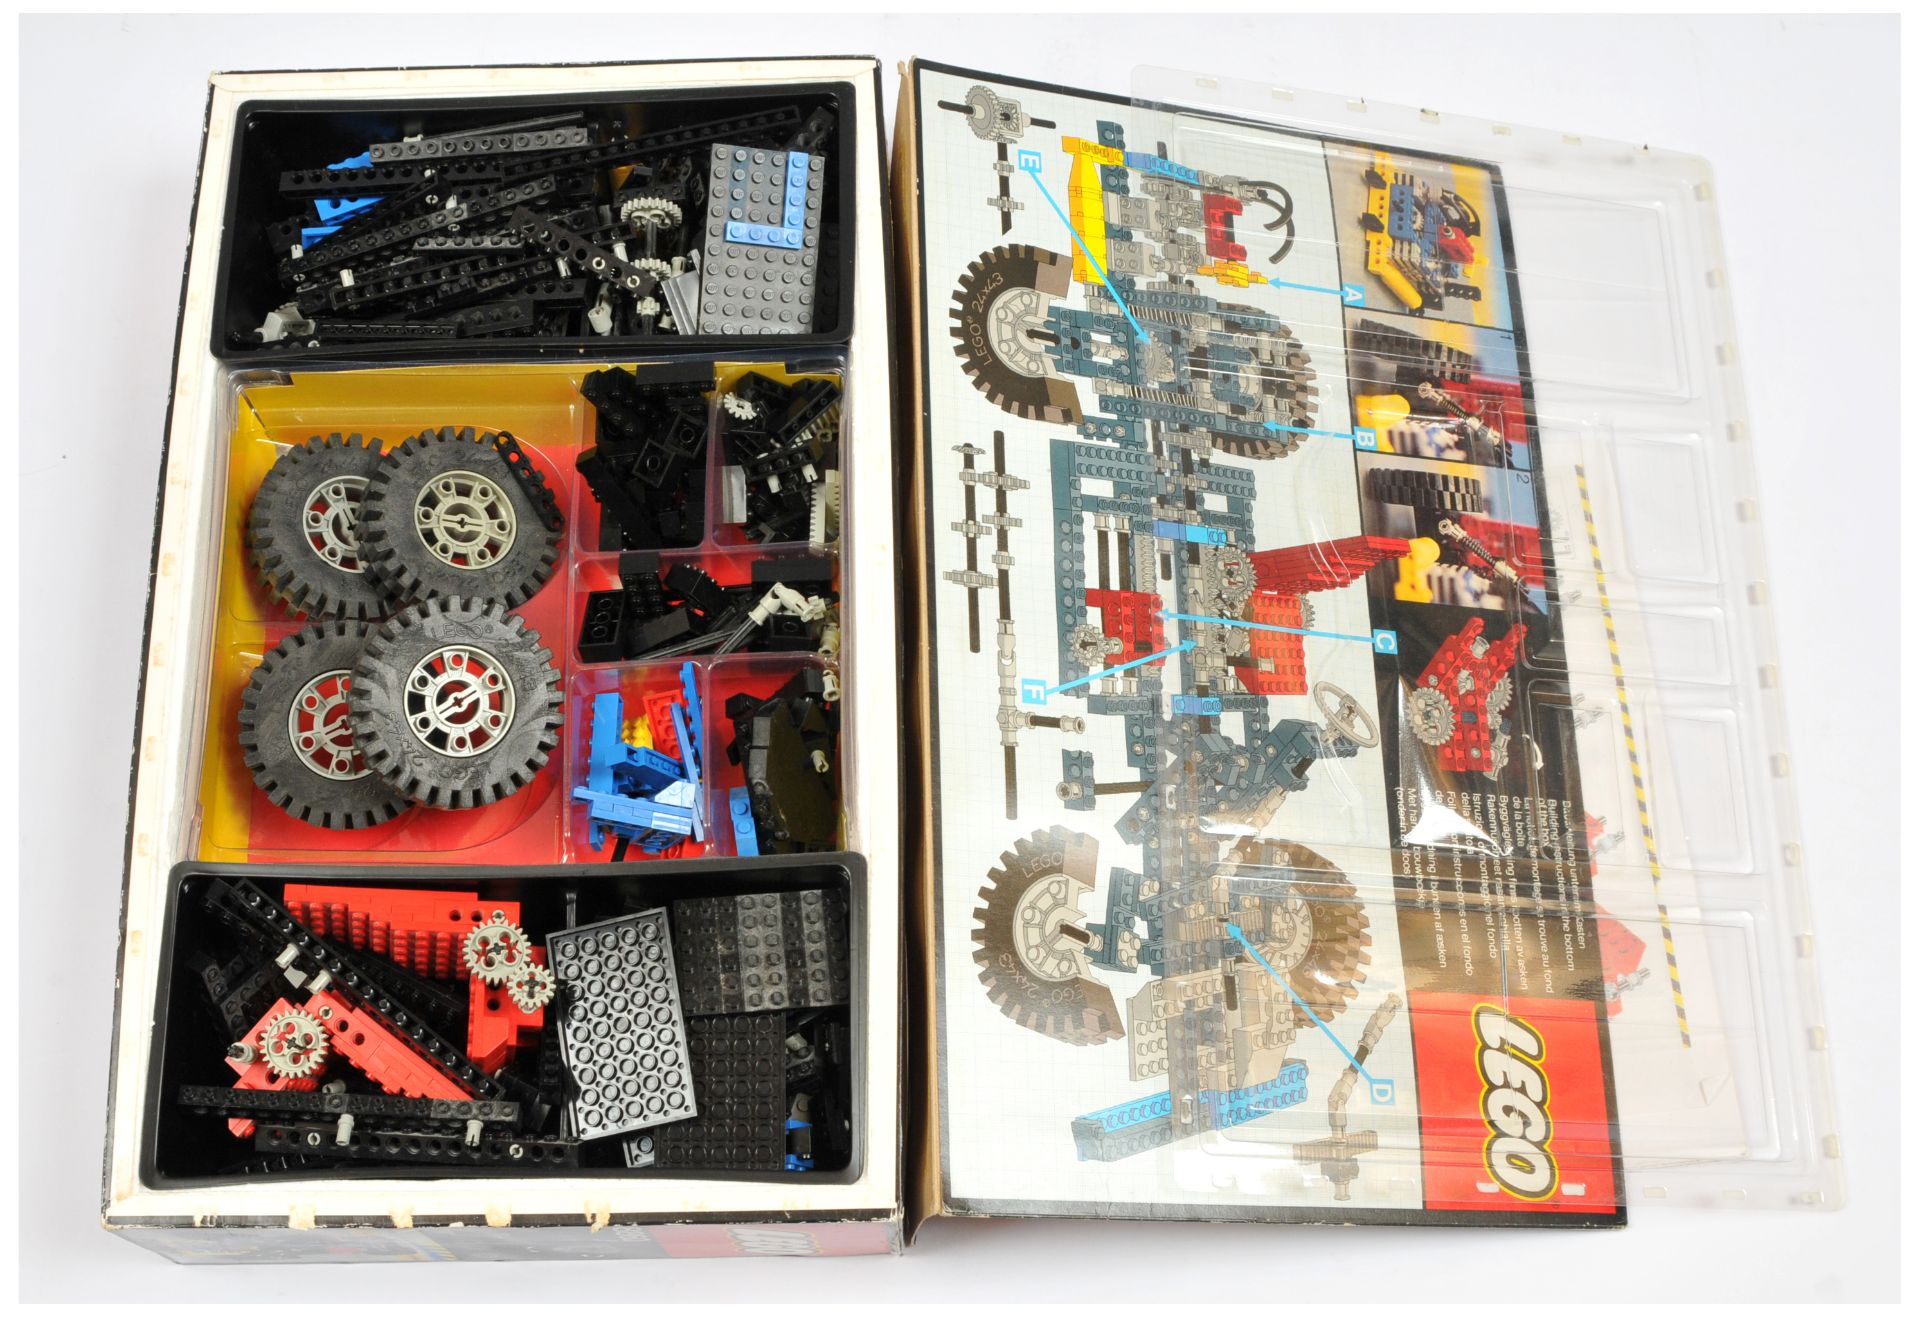 Lego Technic 8860 Expert Builder Car Chassis - with Copied Instructions - Fair to Good, parts are... - Image 2 of 2